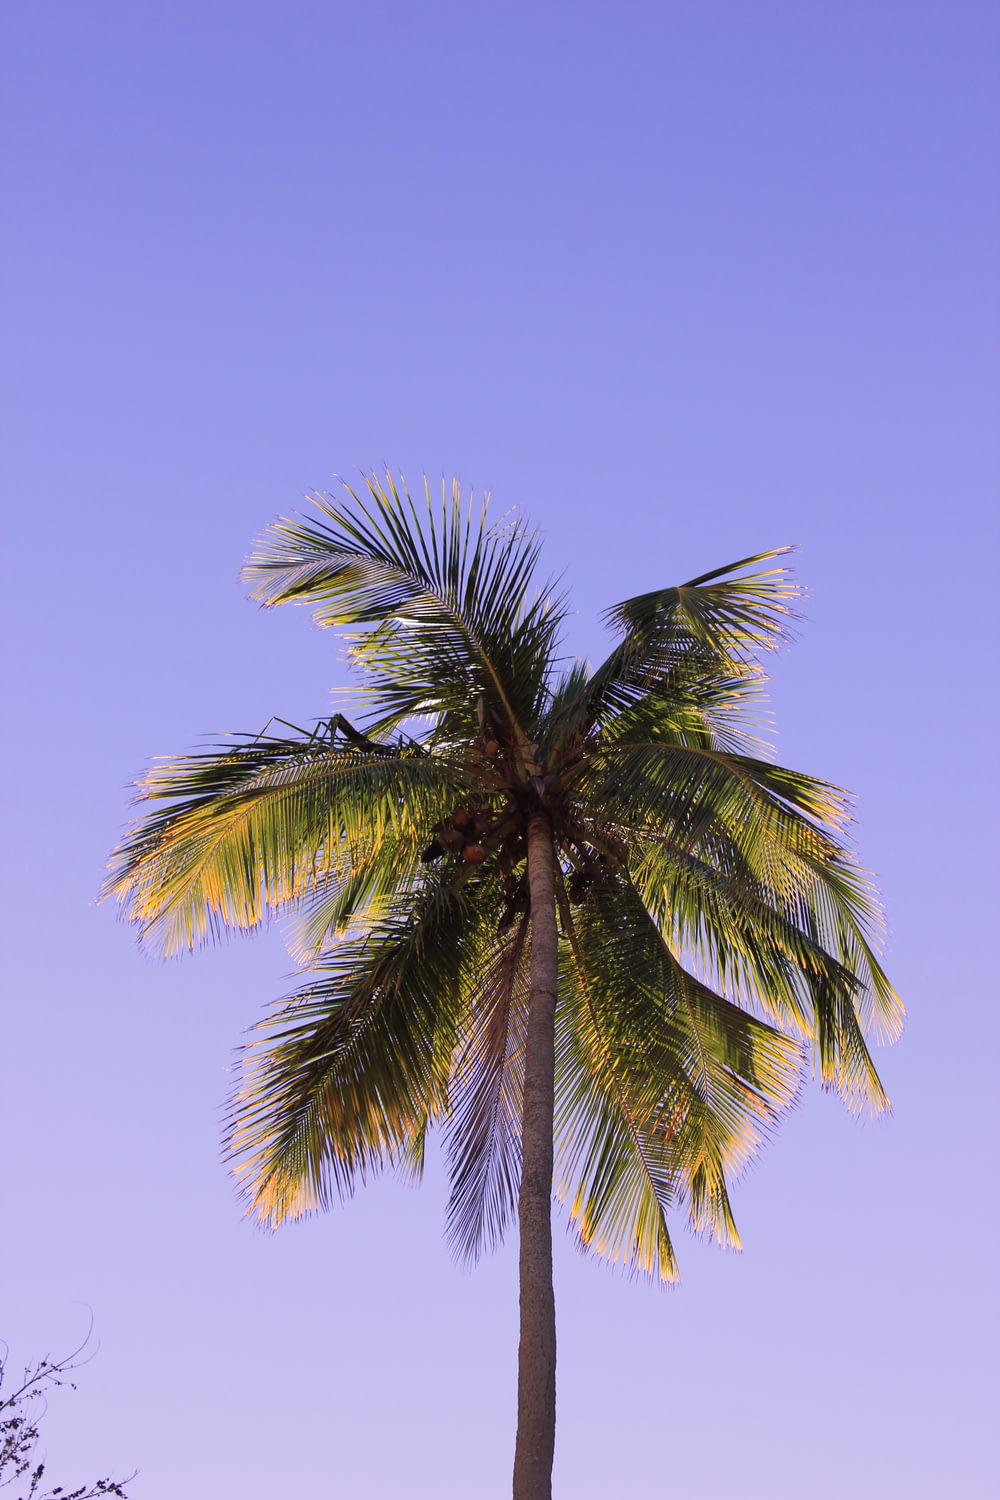 coconut palm tree under blue sky at daytime